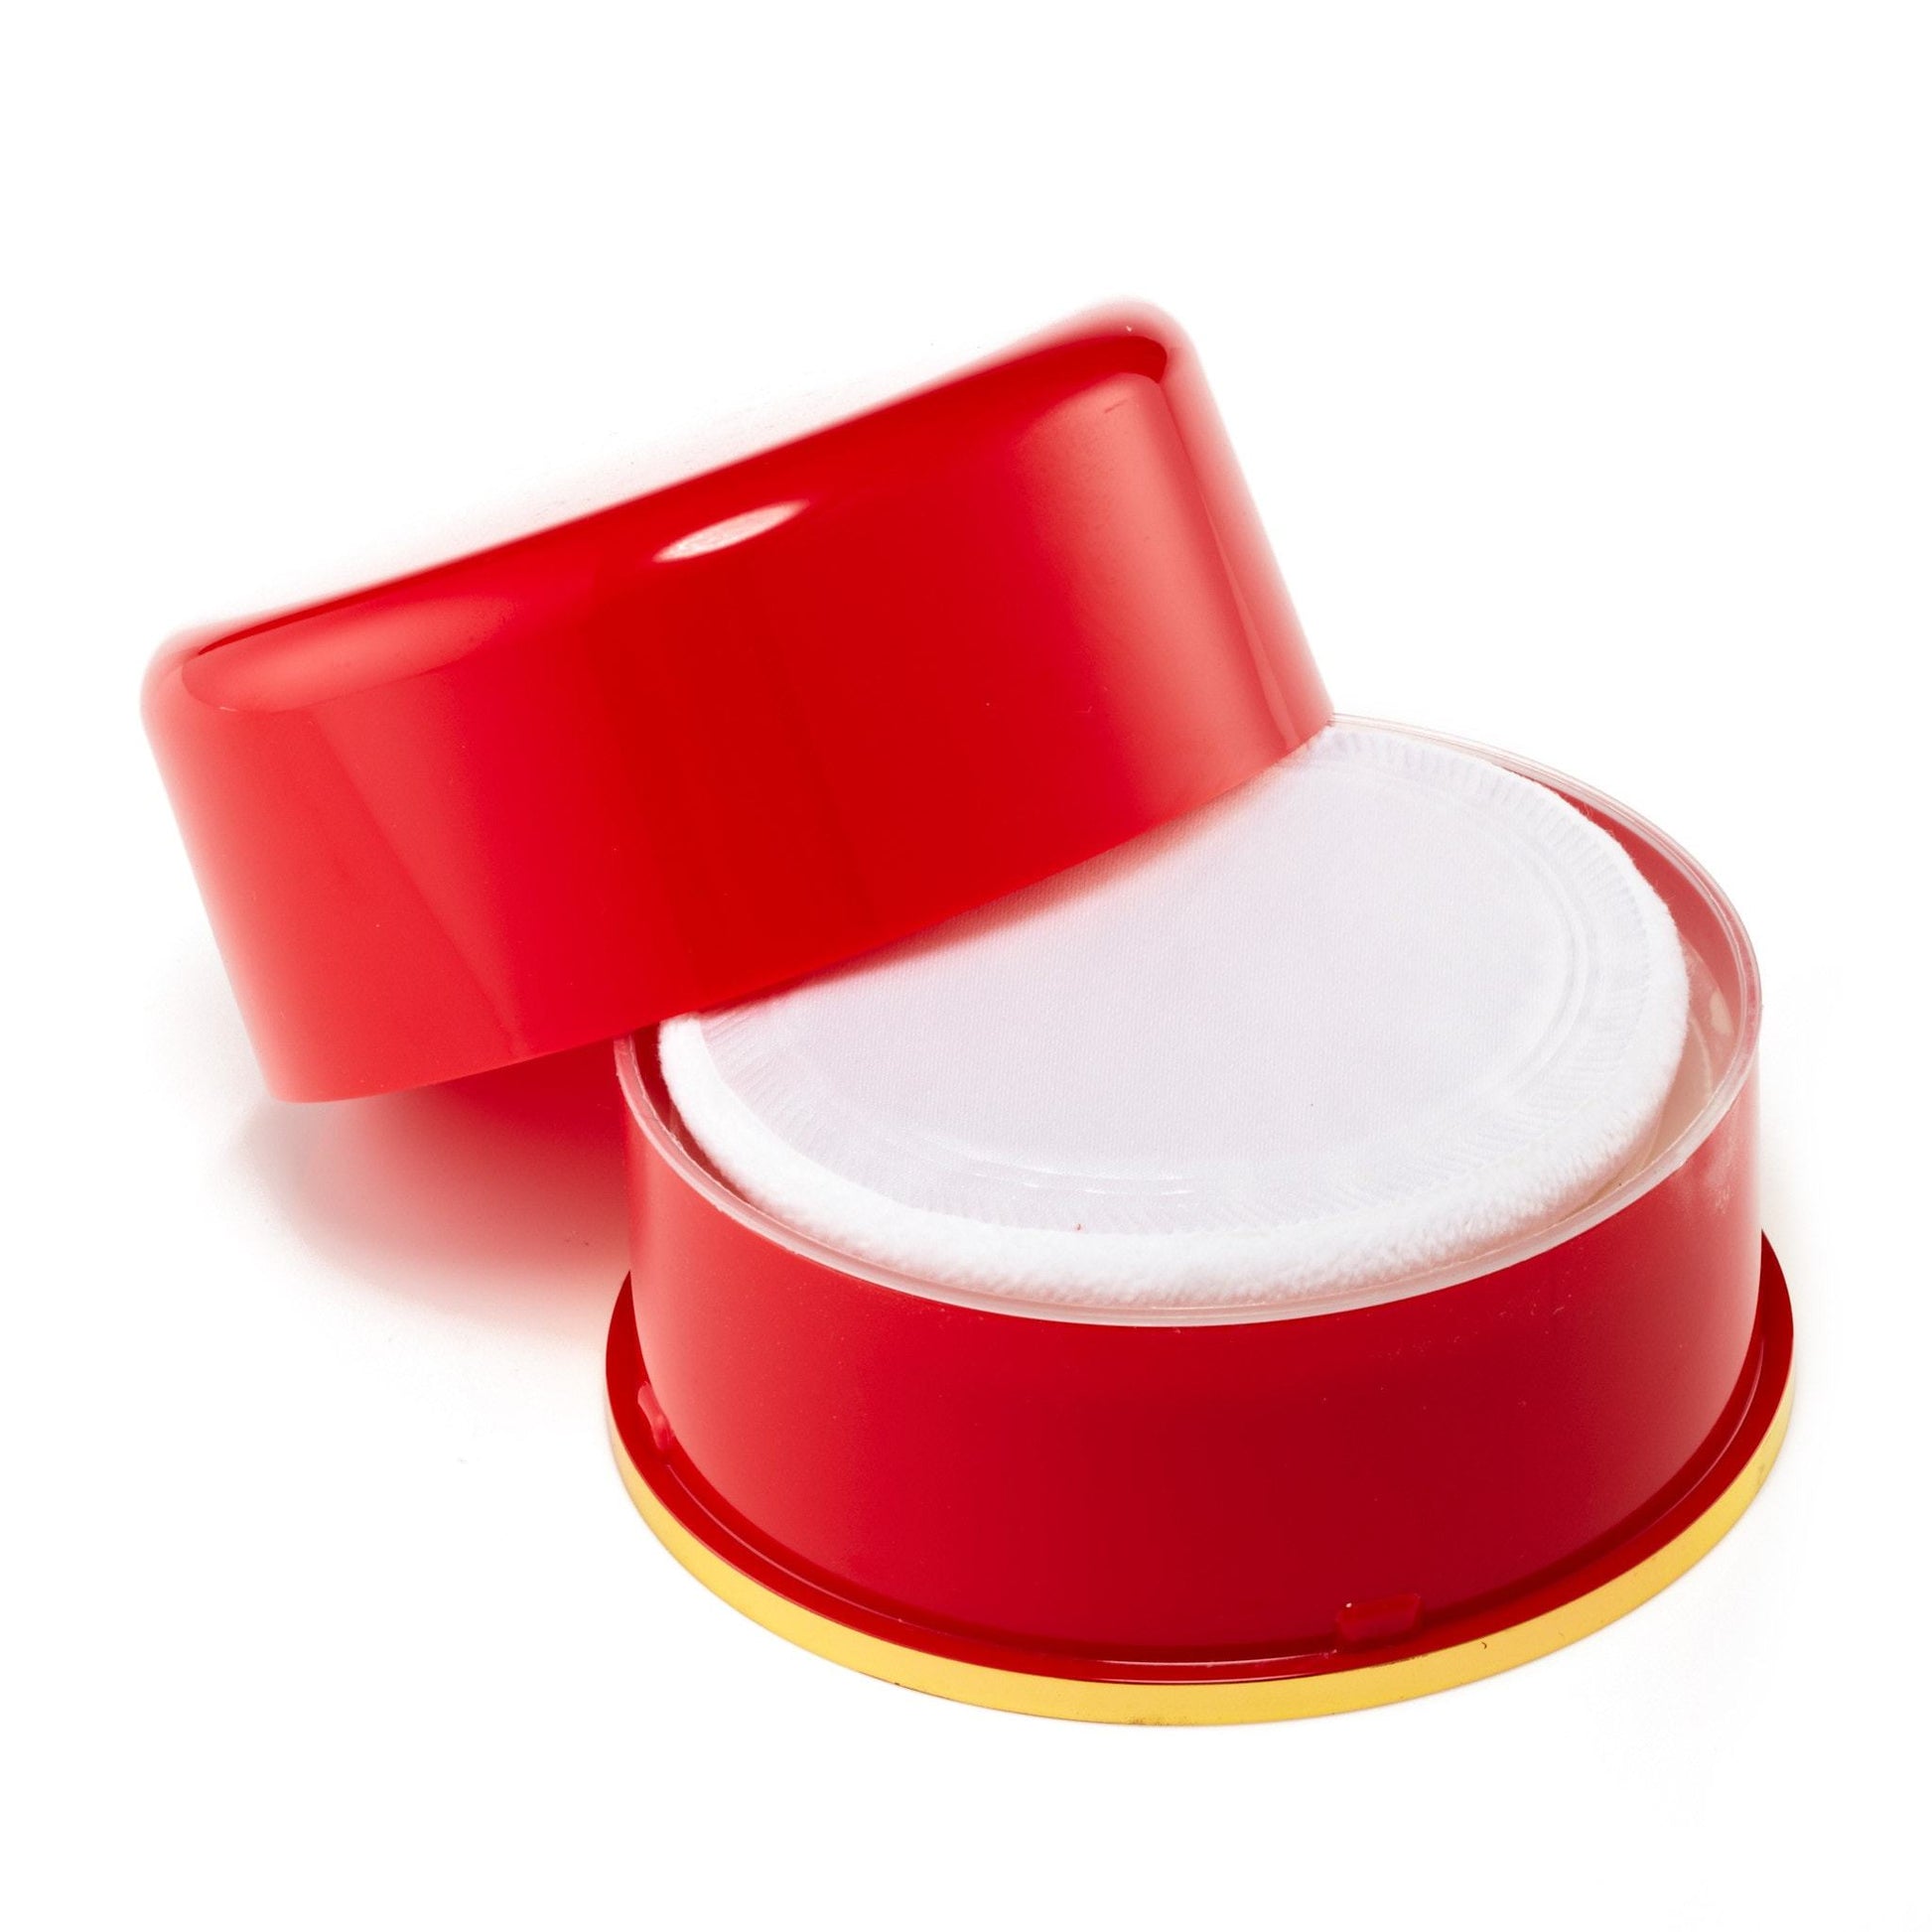 Red Door Dusting Powder for Women by Elizabeth Arden, Product image 3